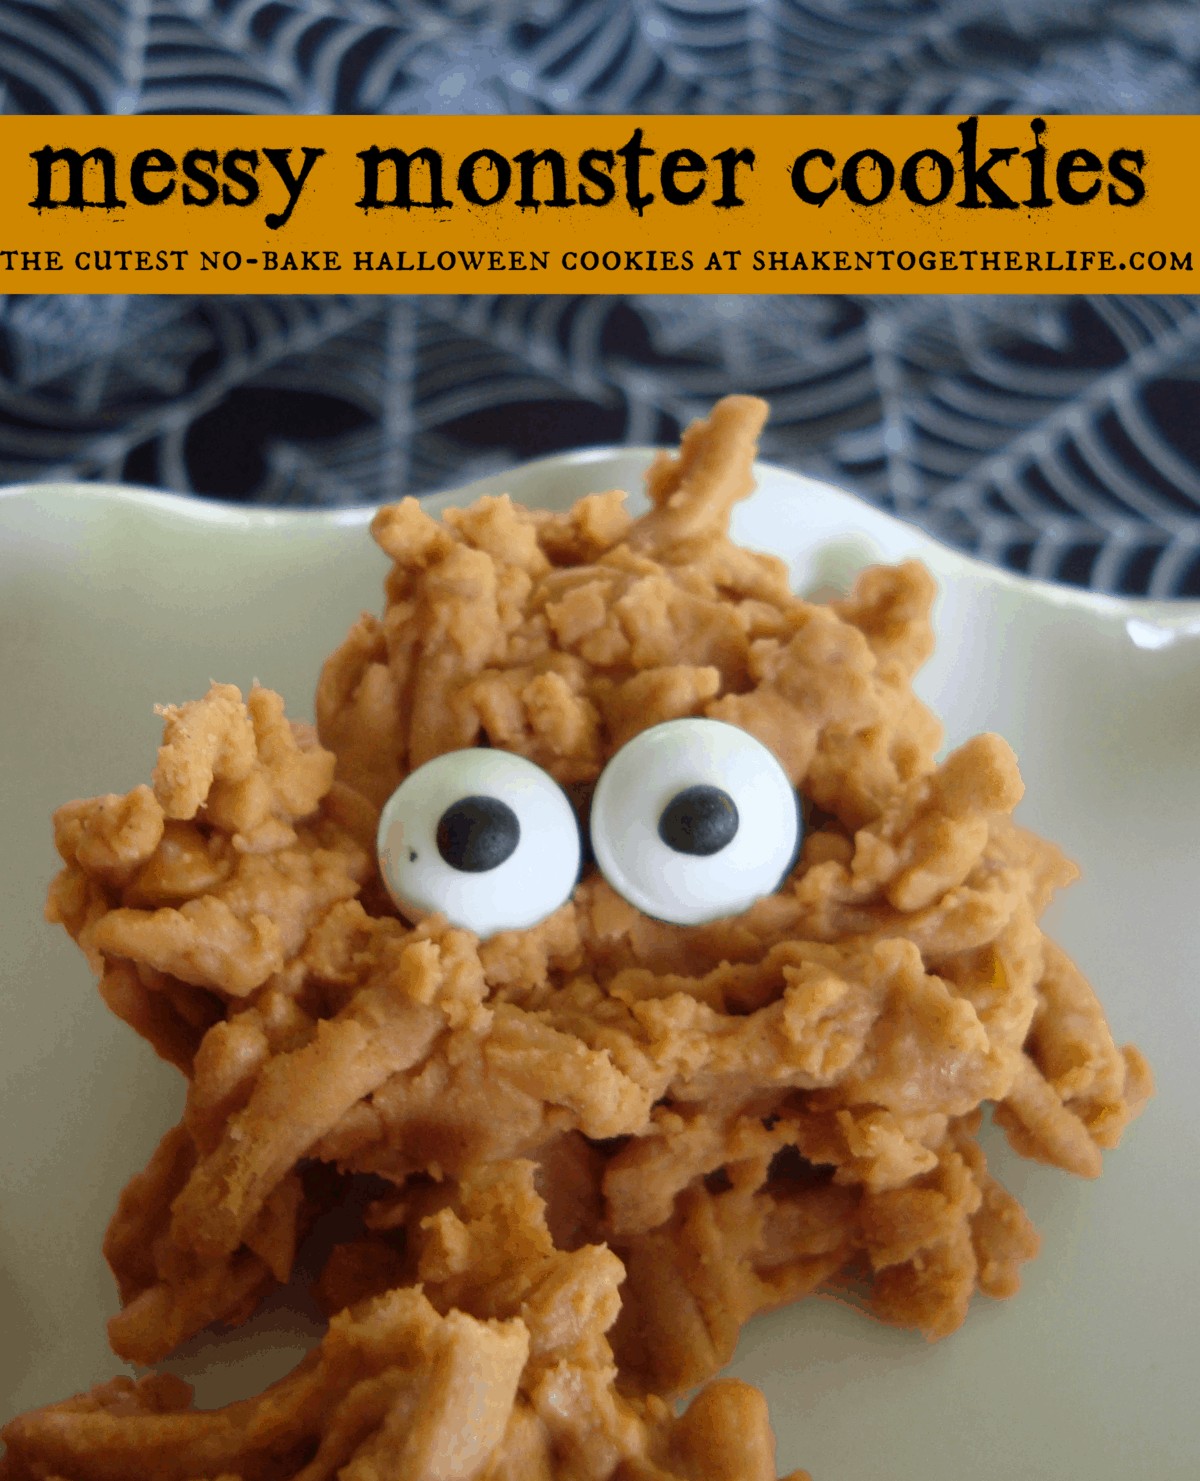 Messy monster cookies the cutest no-bake Halloween cookies at shakentogetherlife.com